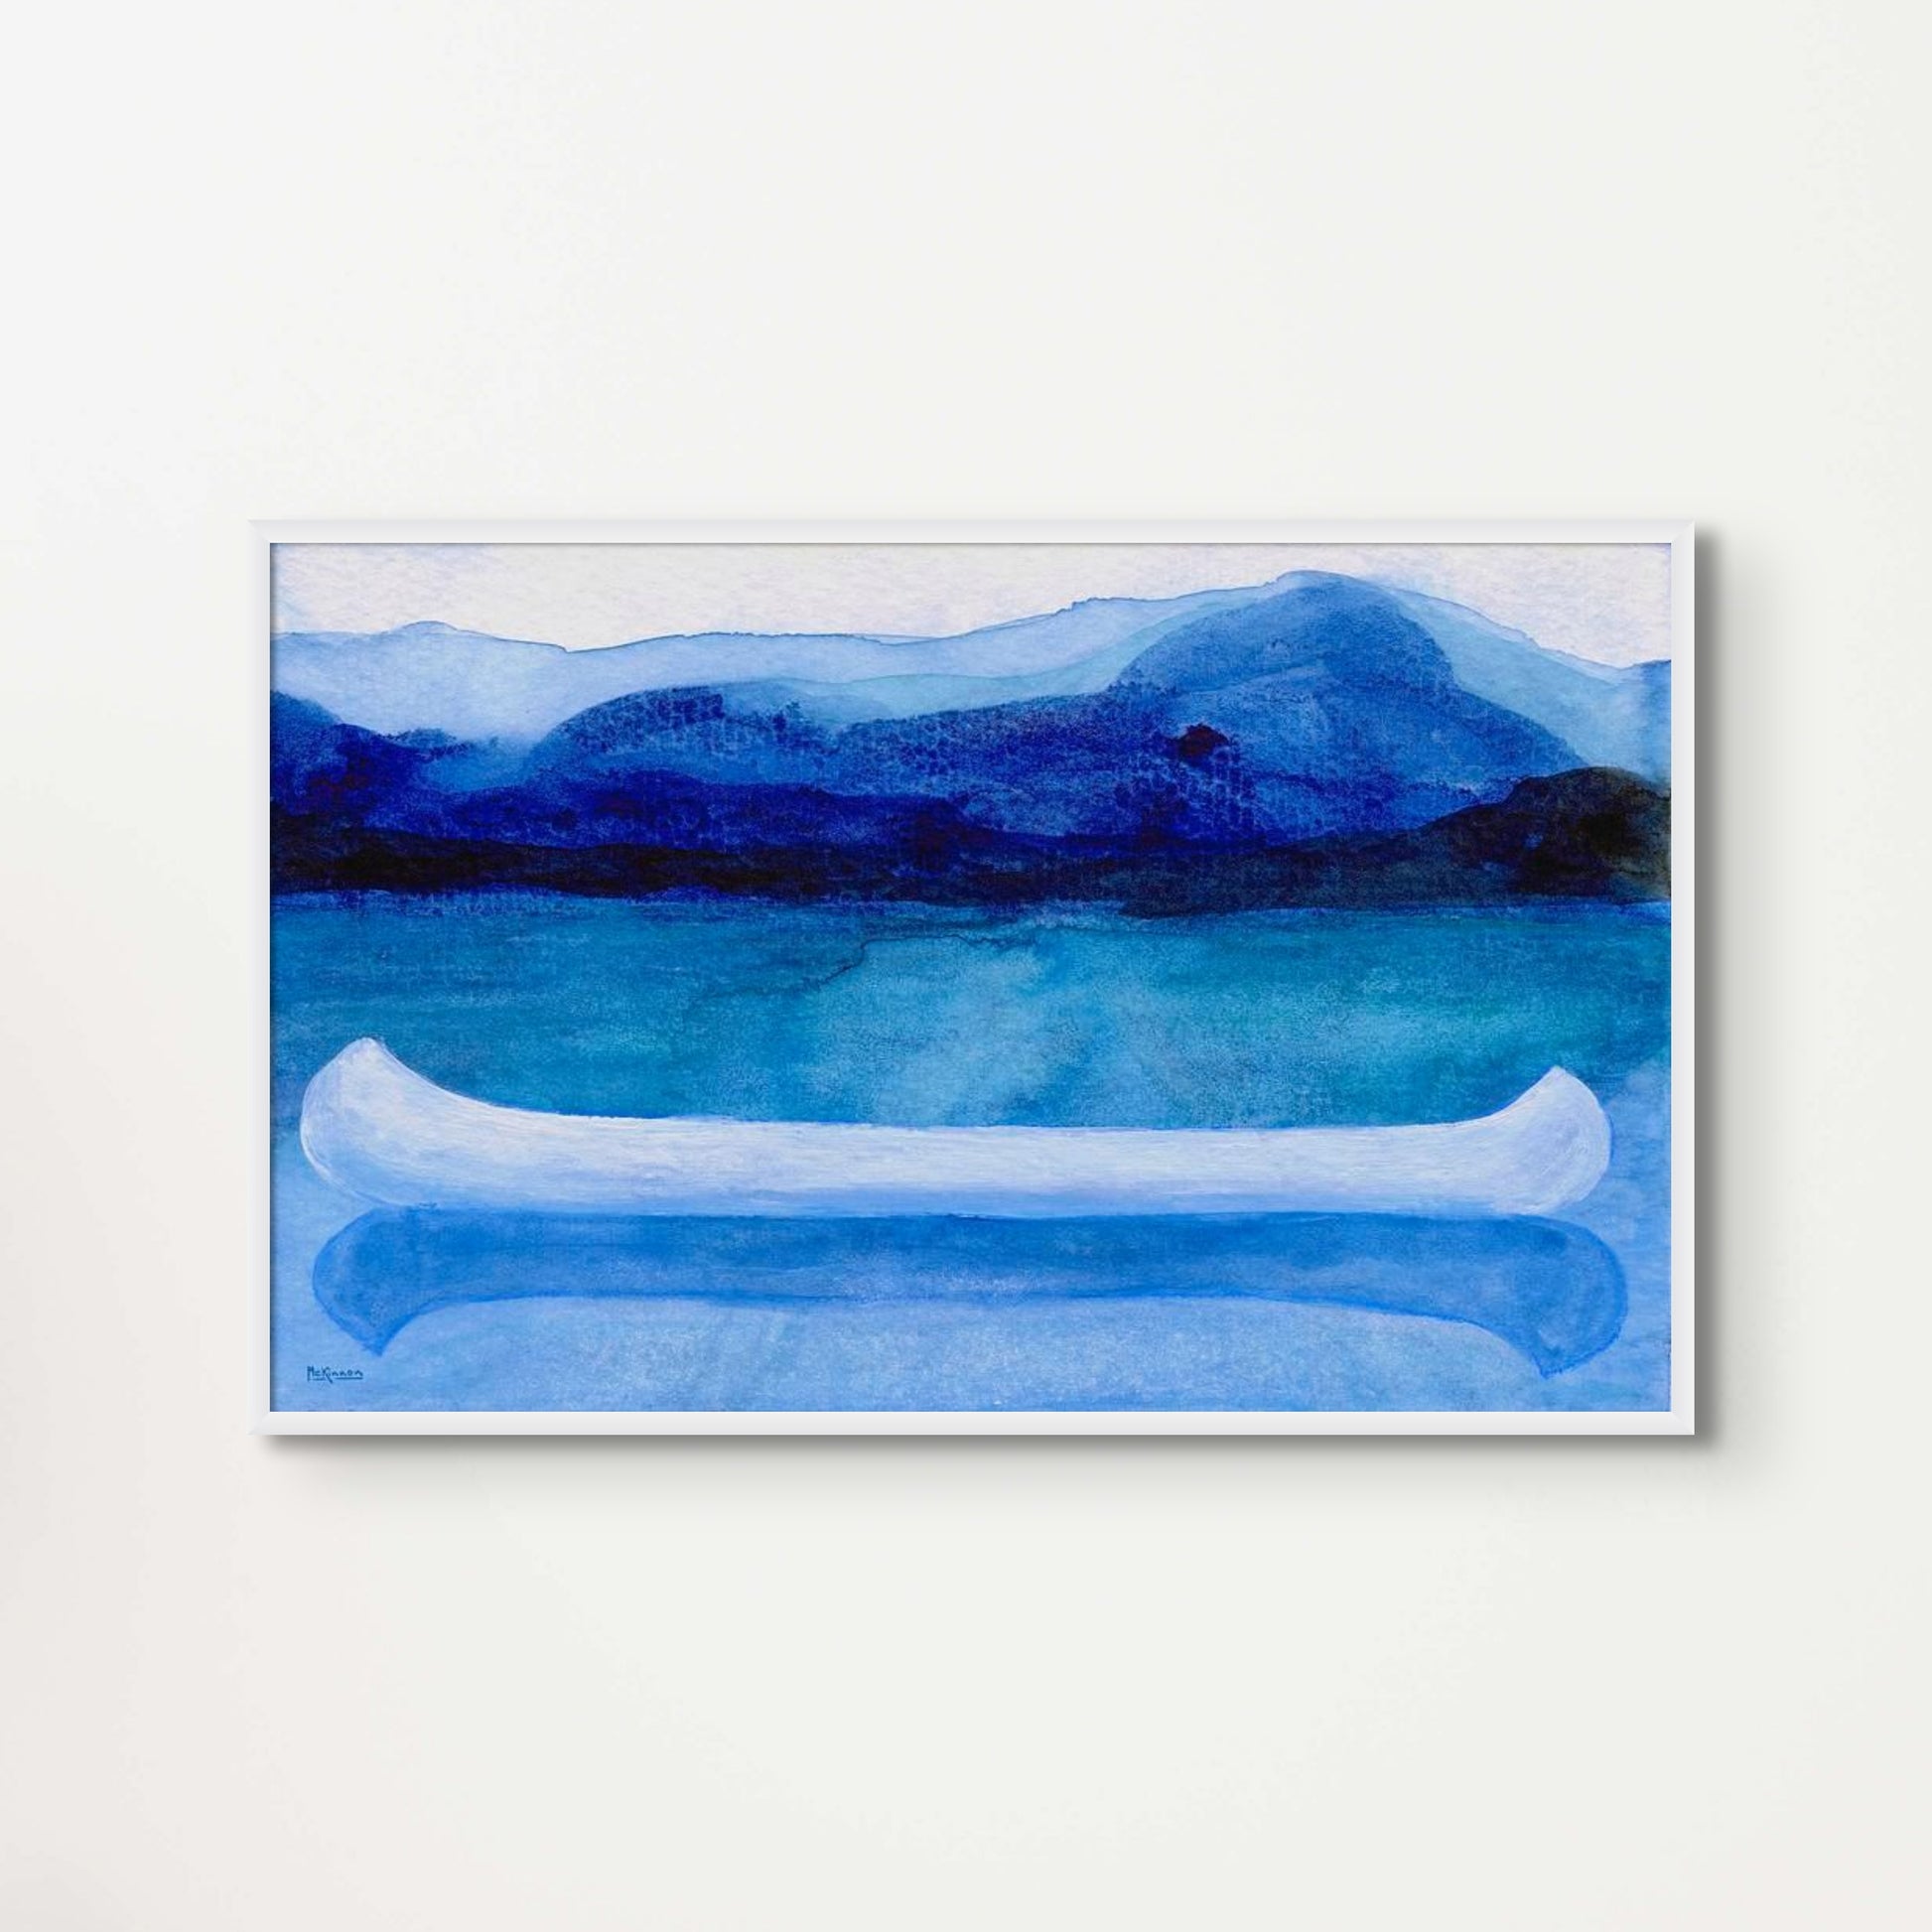 A work of canoeing art by Canadian artist Catherine McKinnon. The watercolor depicts a small white boat, a "canoe", on blue water with a dark blue distant shore and lighter blue distant moutains. The giclee print is framed in white and is mounted on a light gray wall.